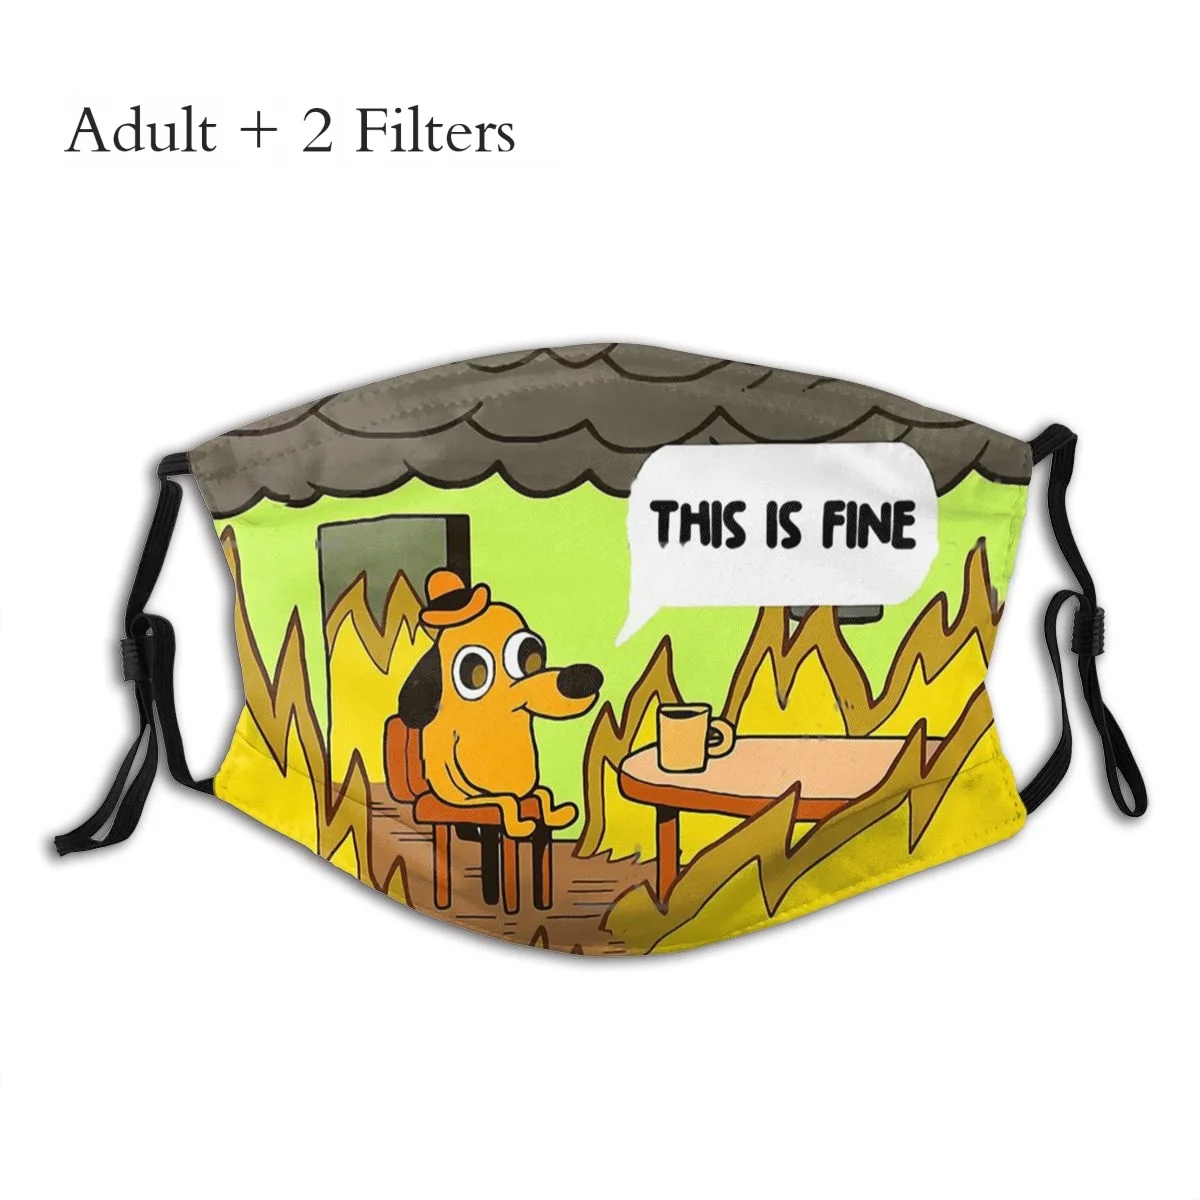 This Is Fine Dog Fire Meme Unisex Mask Bitcoin Cryptocurrency Miners Meme Fabric Windproof Print Big Sale Cover With Filters